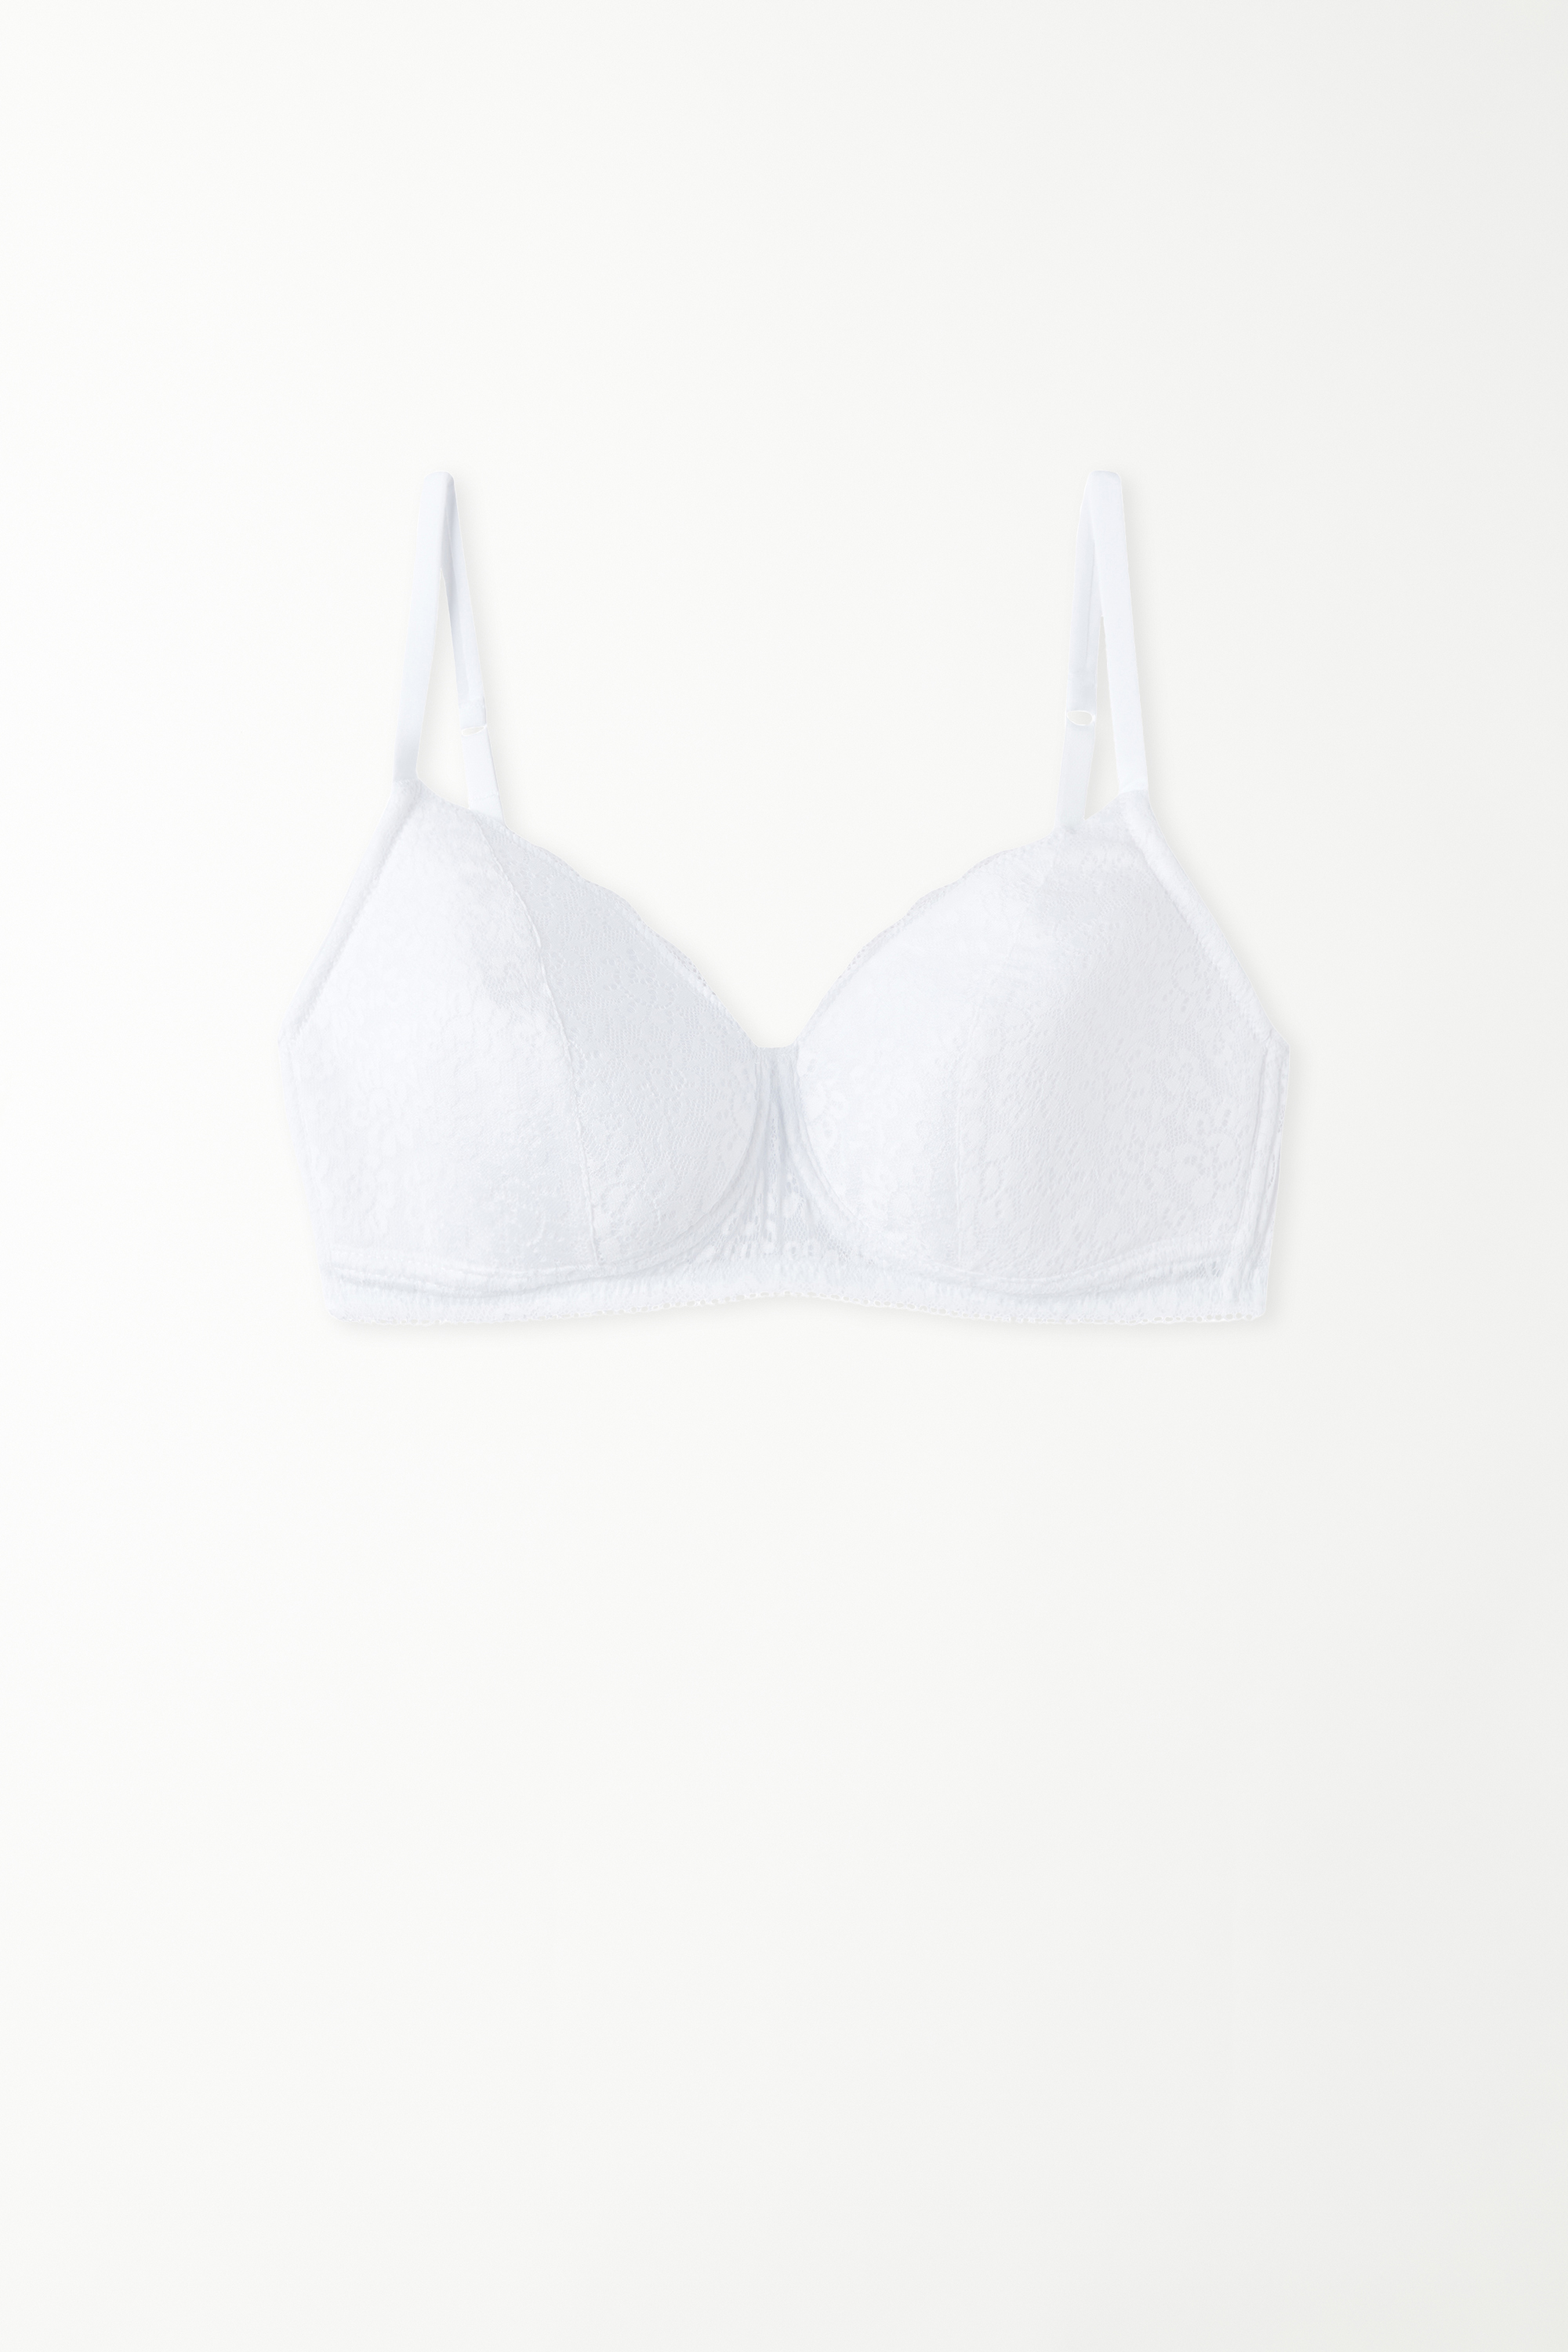 Warsaw Lightly Padded Lace Triangle Bra